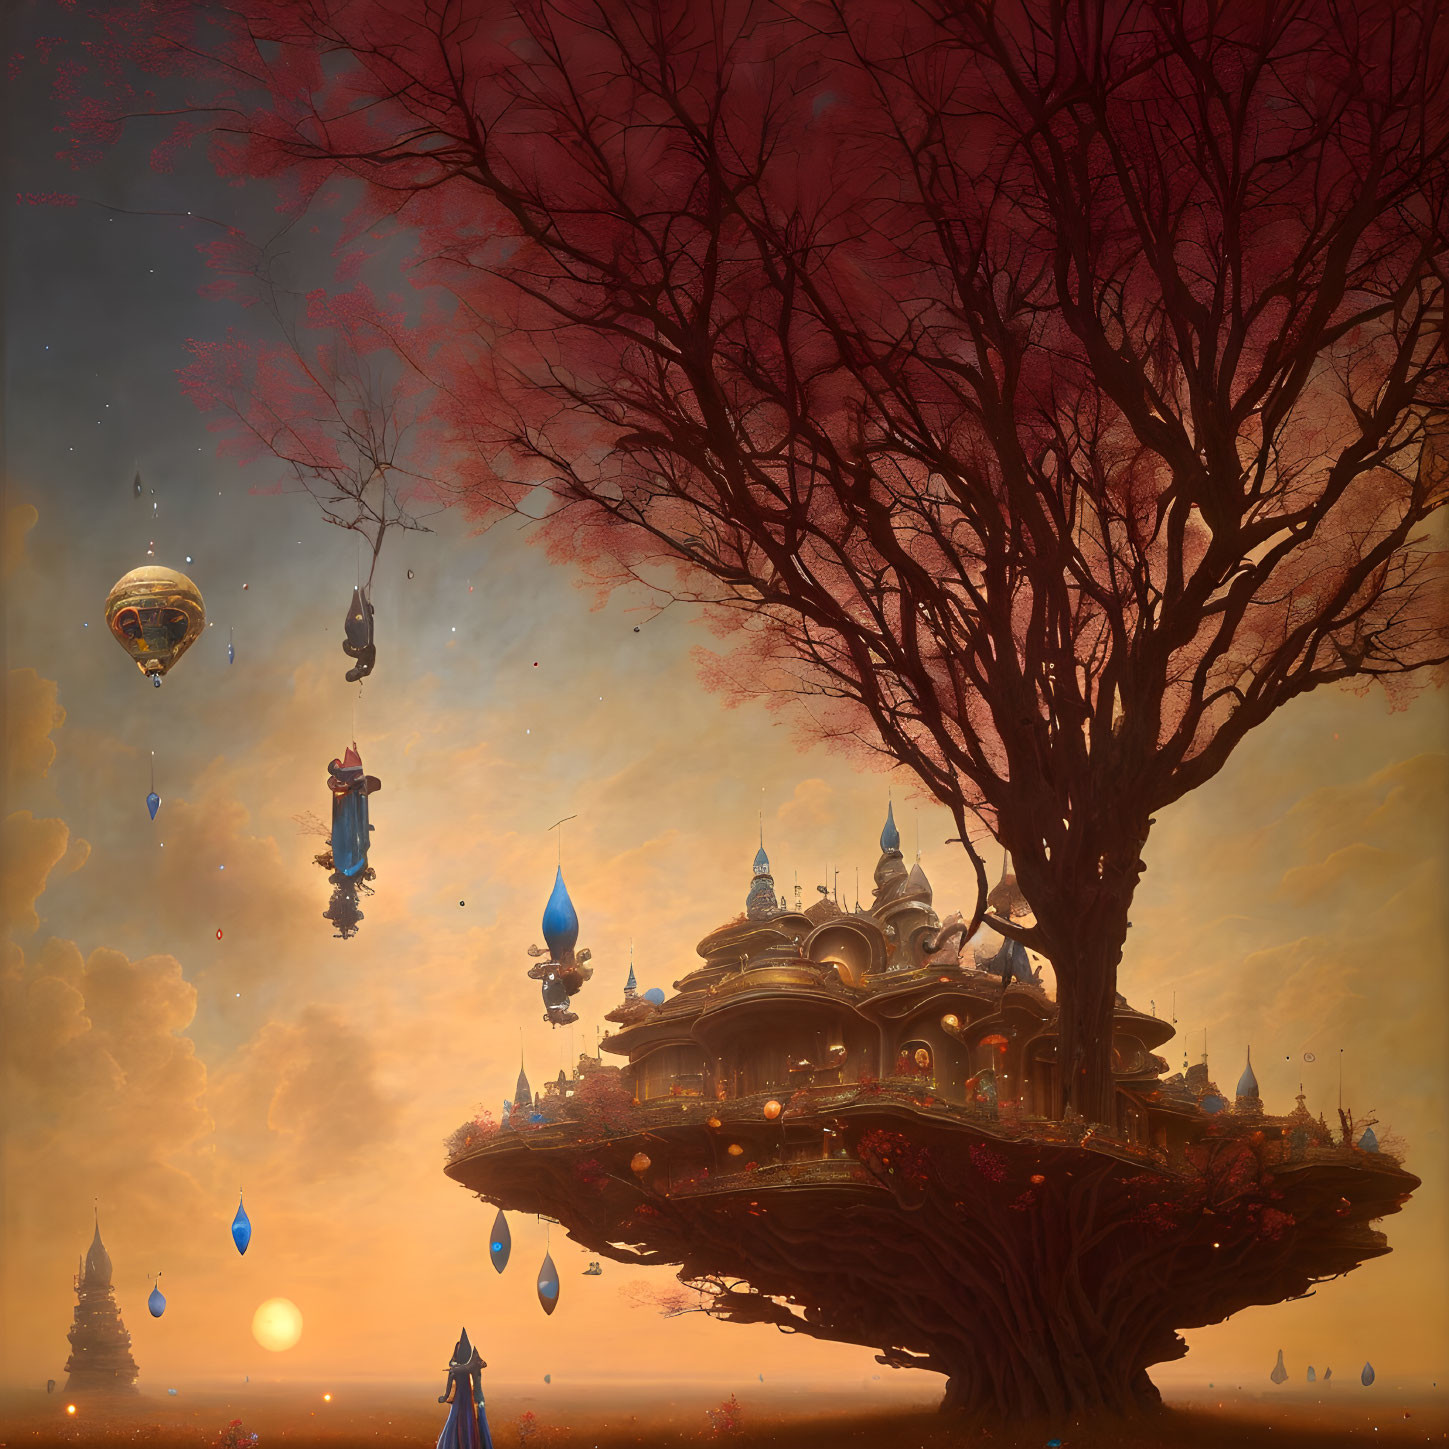 Fantastical scene: large tree, ornate building, floating islands, hot air balloons, wing